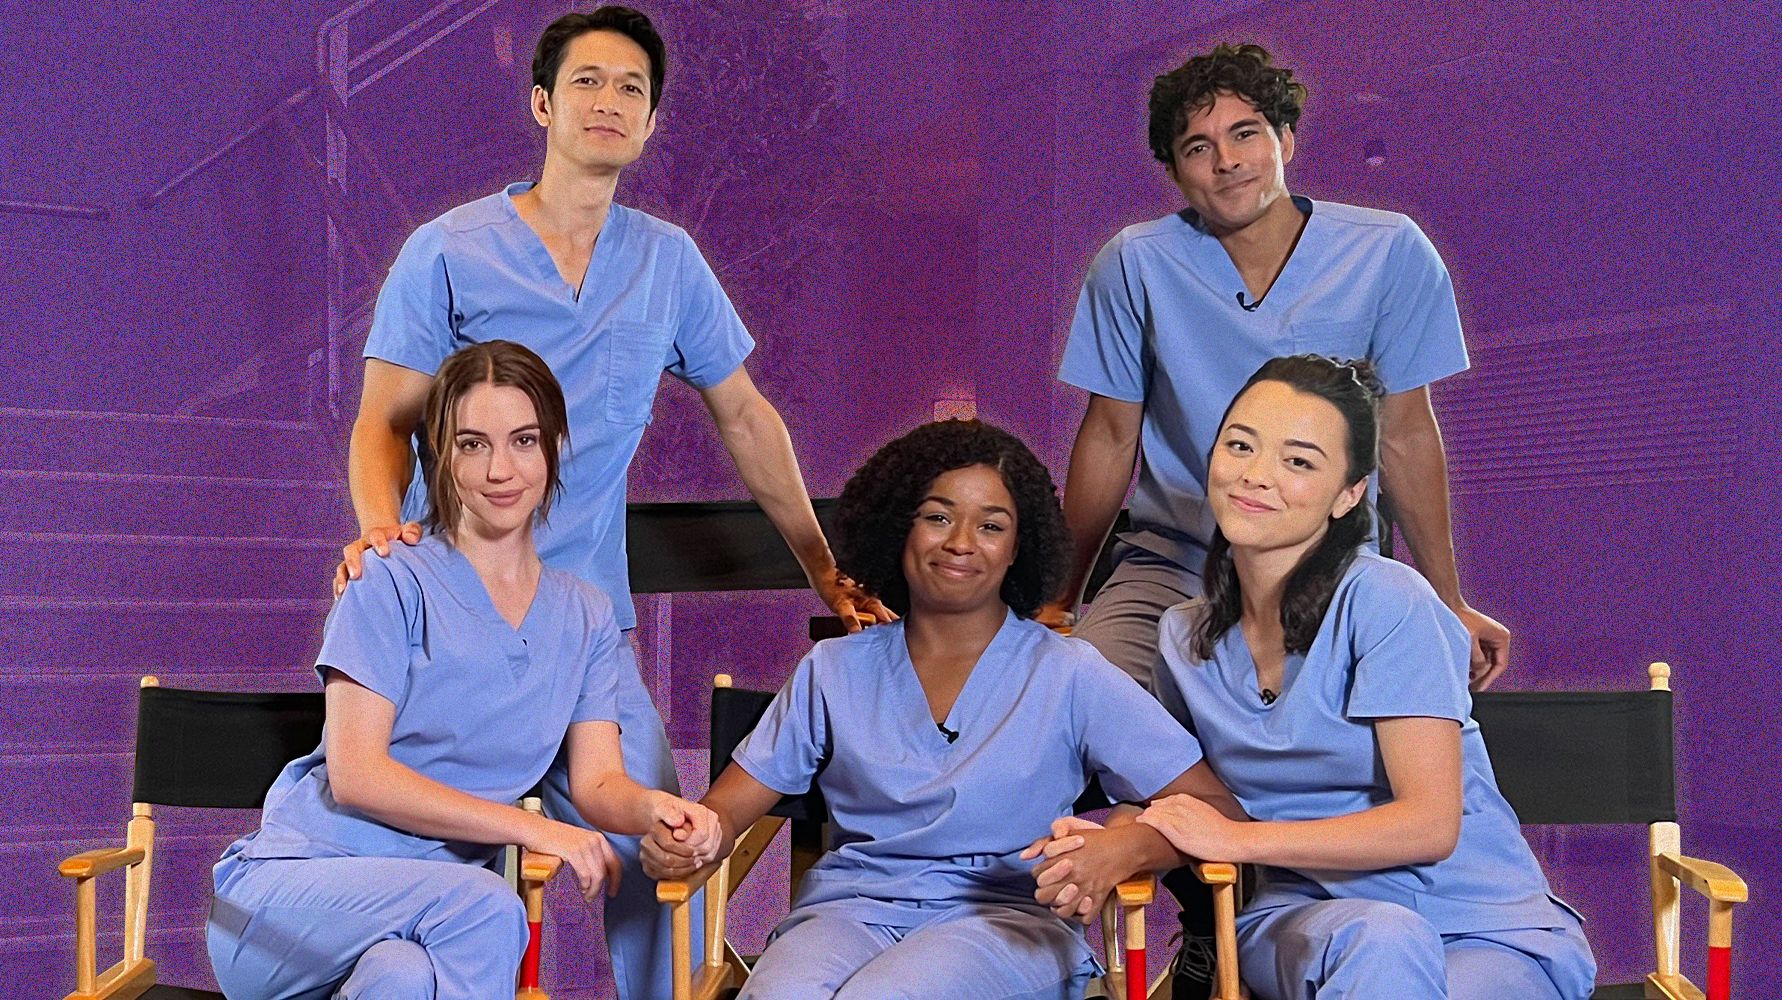 Low Mb Family Sex Videos - The 5 New Interns of 'Grey's Anatomy' Reveal All the Details About Their  Debuts in a Behind-the-Scenes Interview